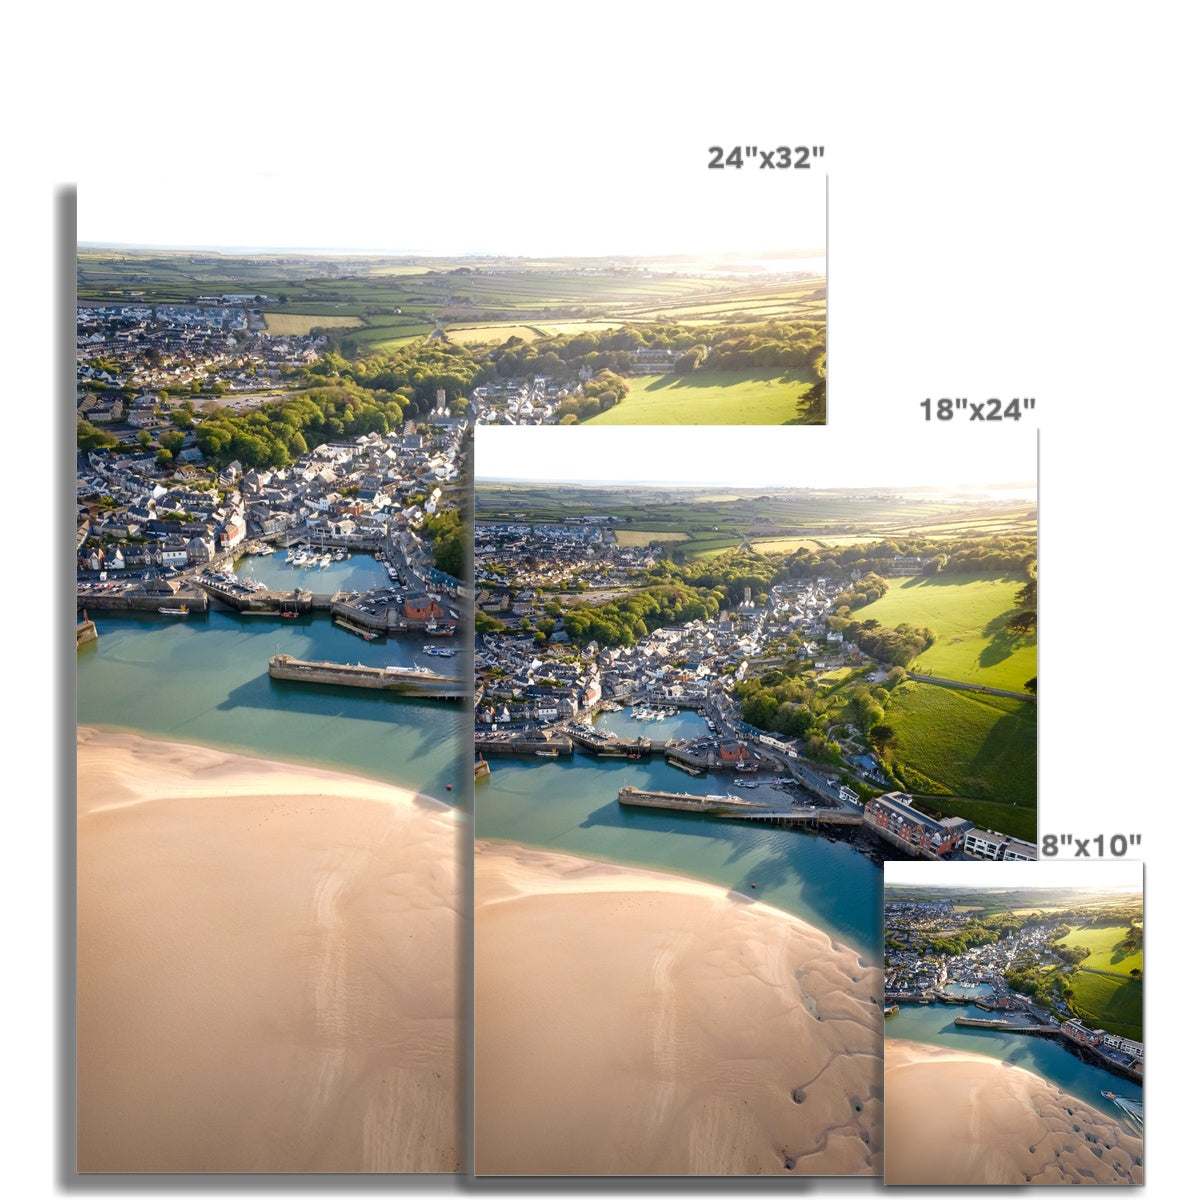 padstow picture sizes